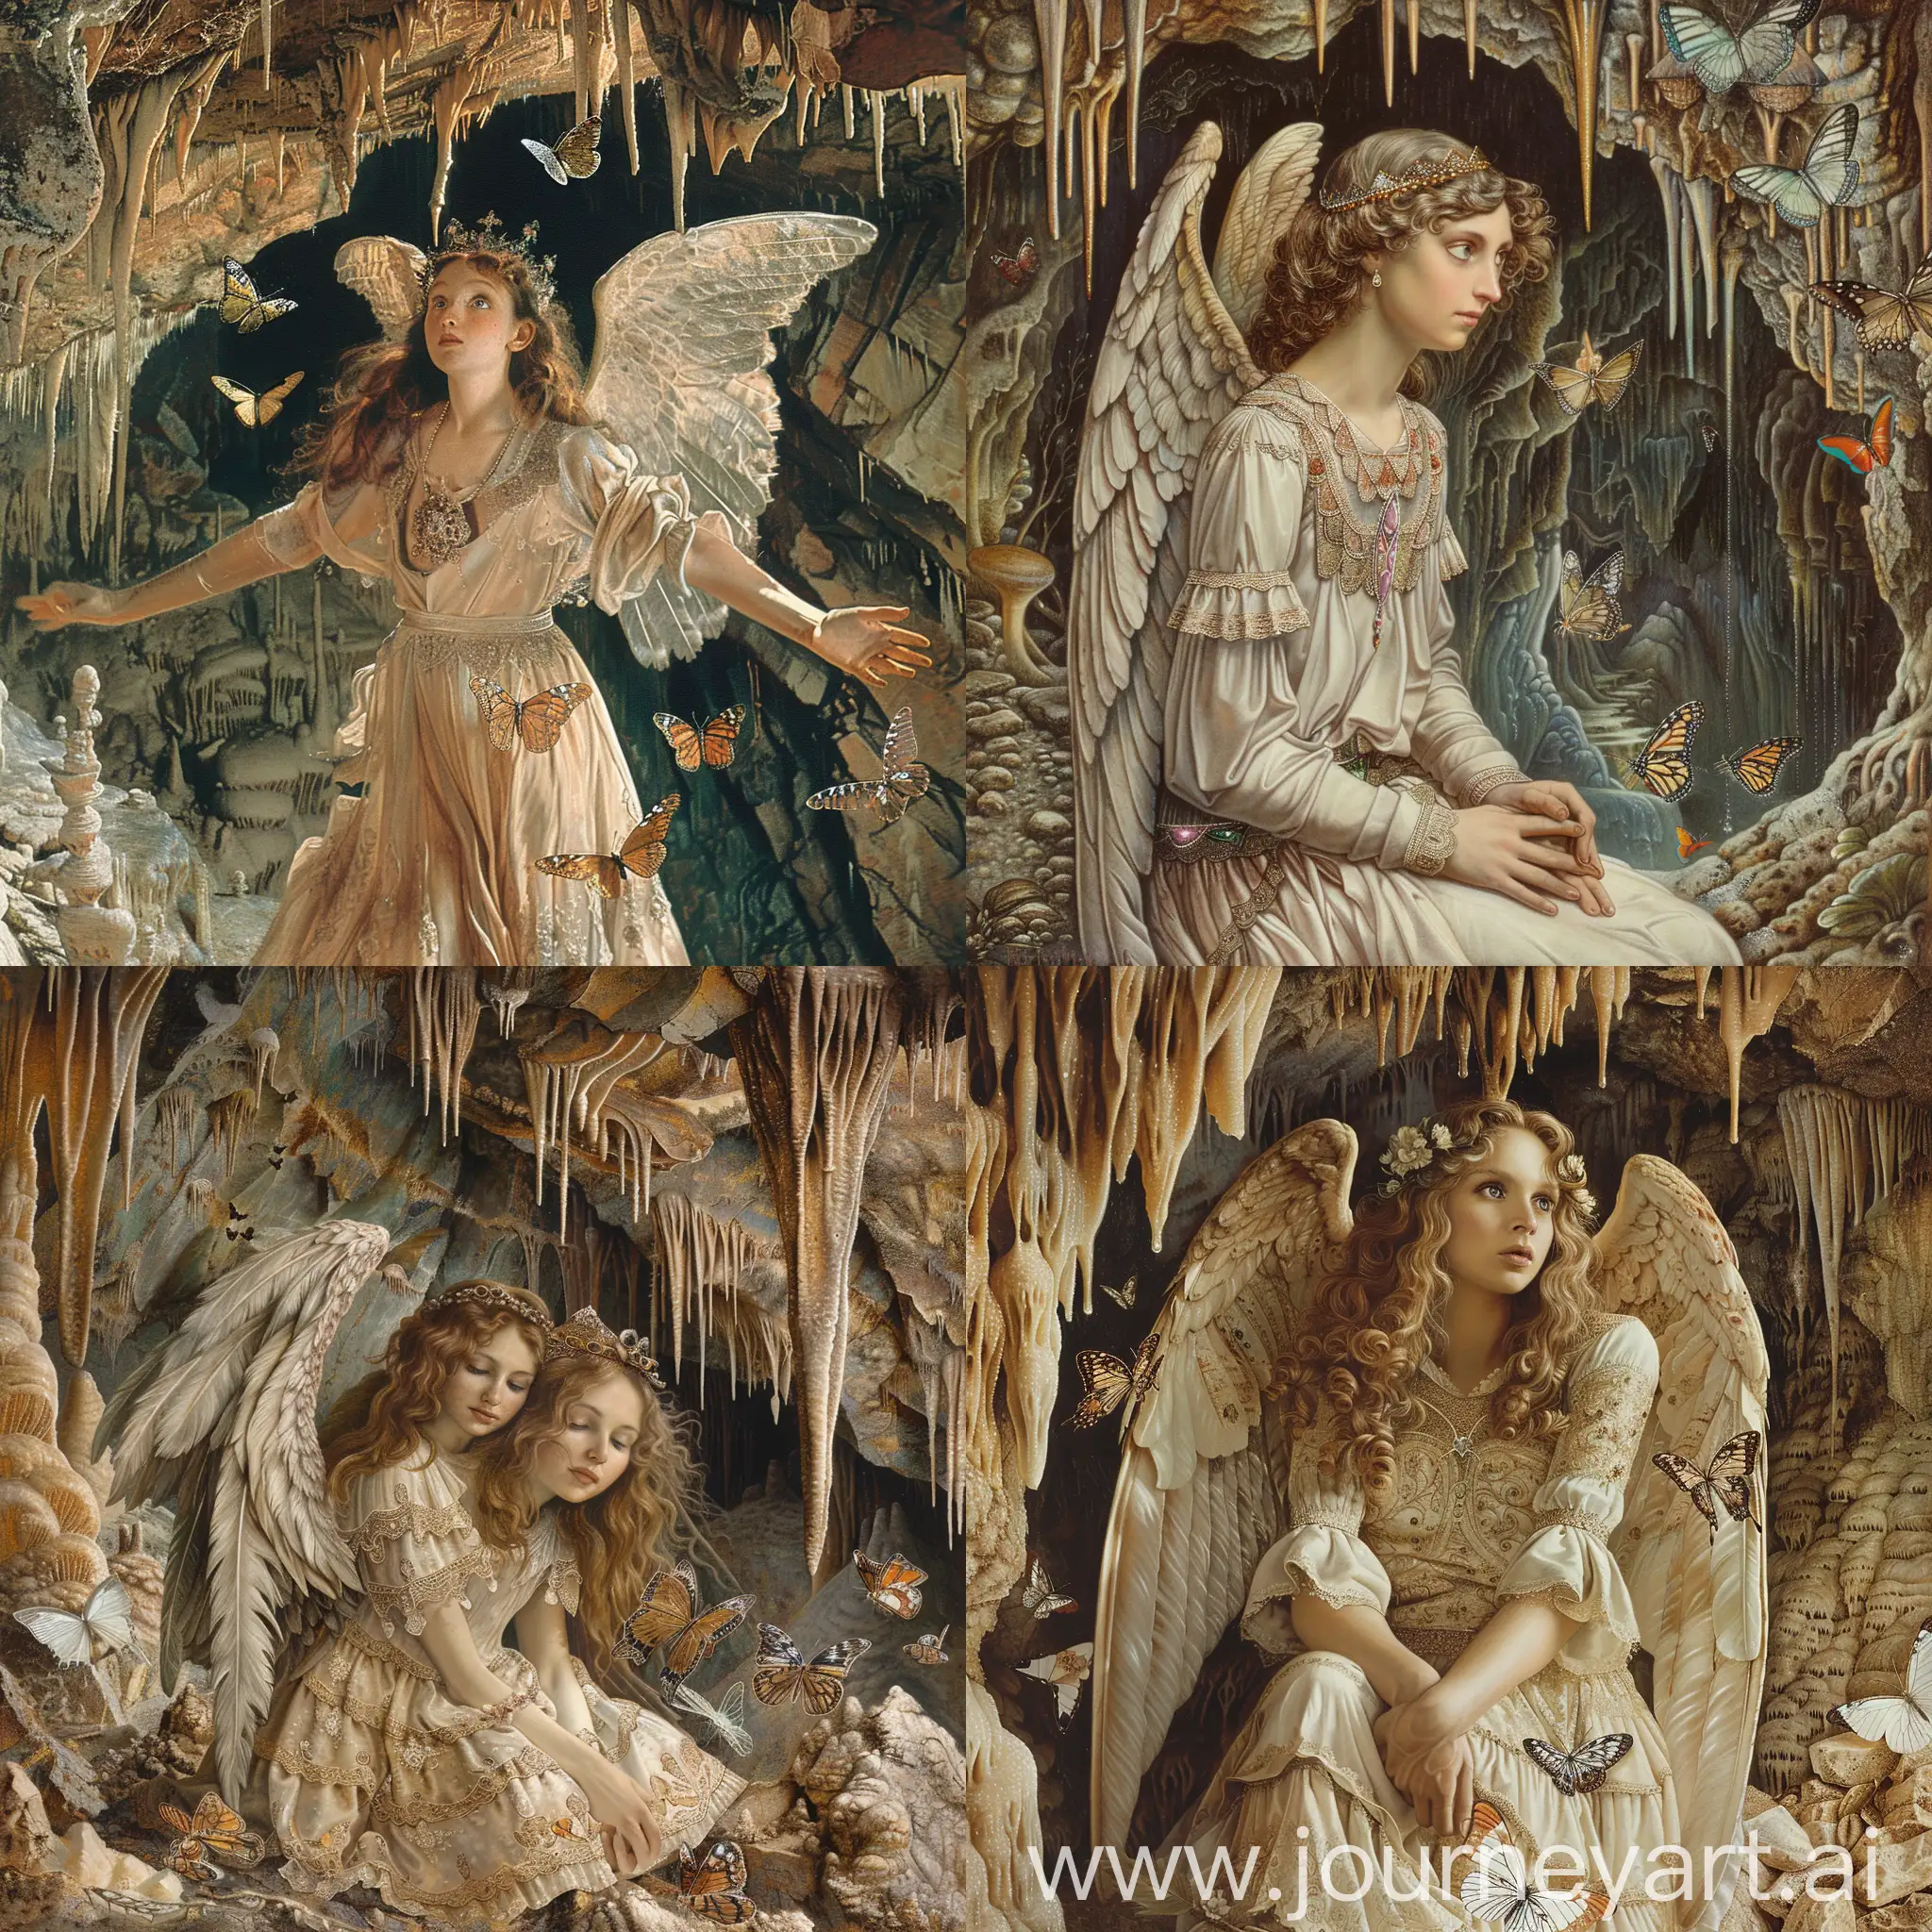 Medieval-Angel-Woman-in-Cave-with-Stalagmites-Stalactites-and-Butterflies